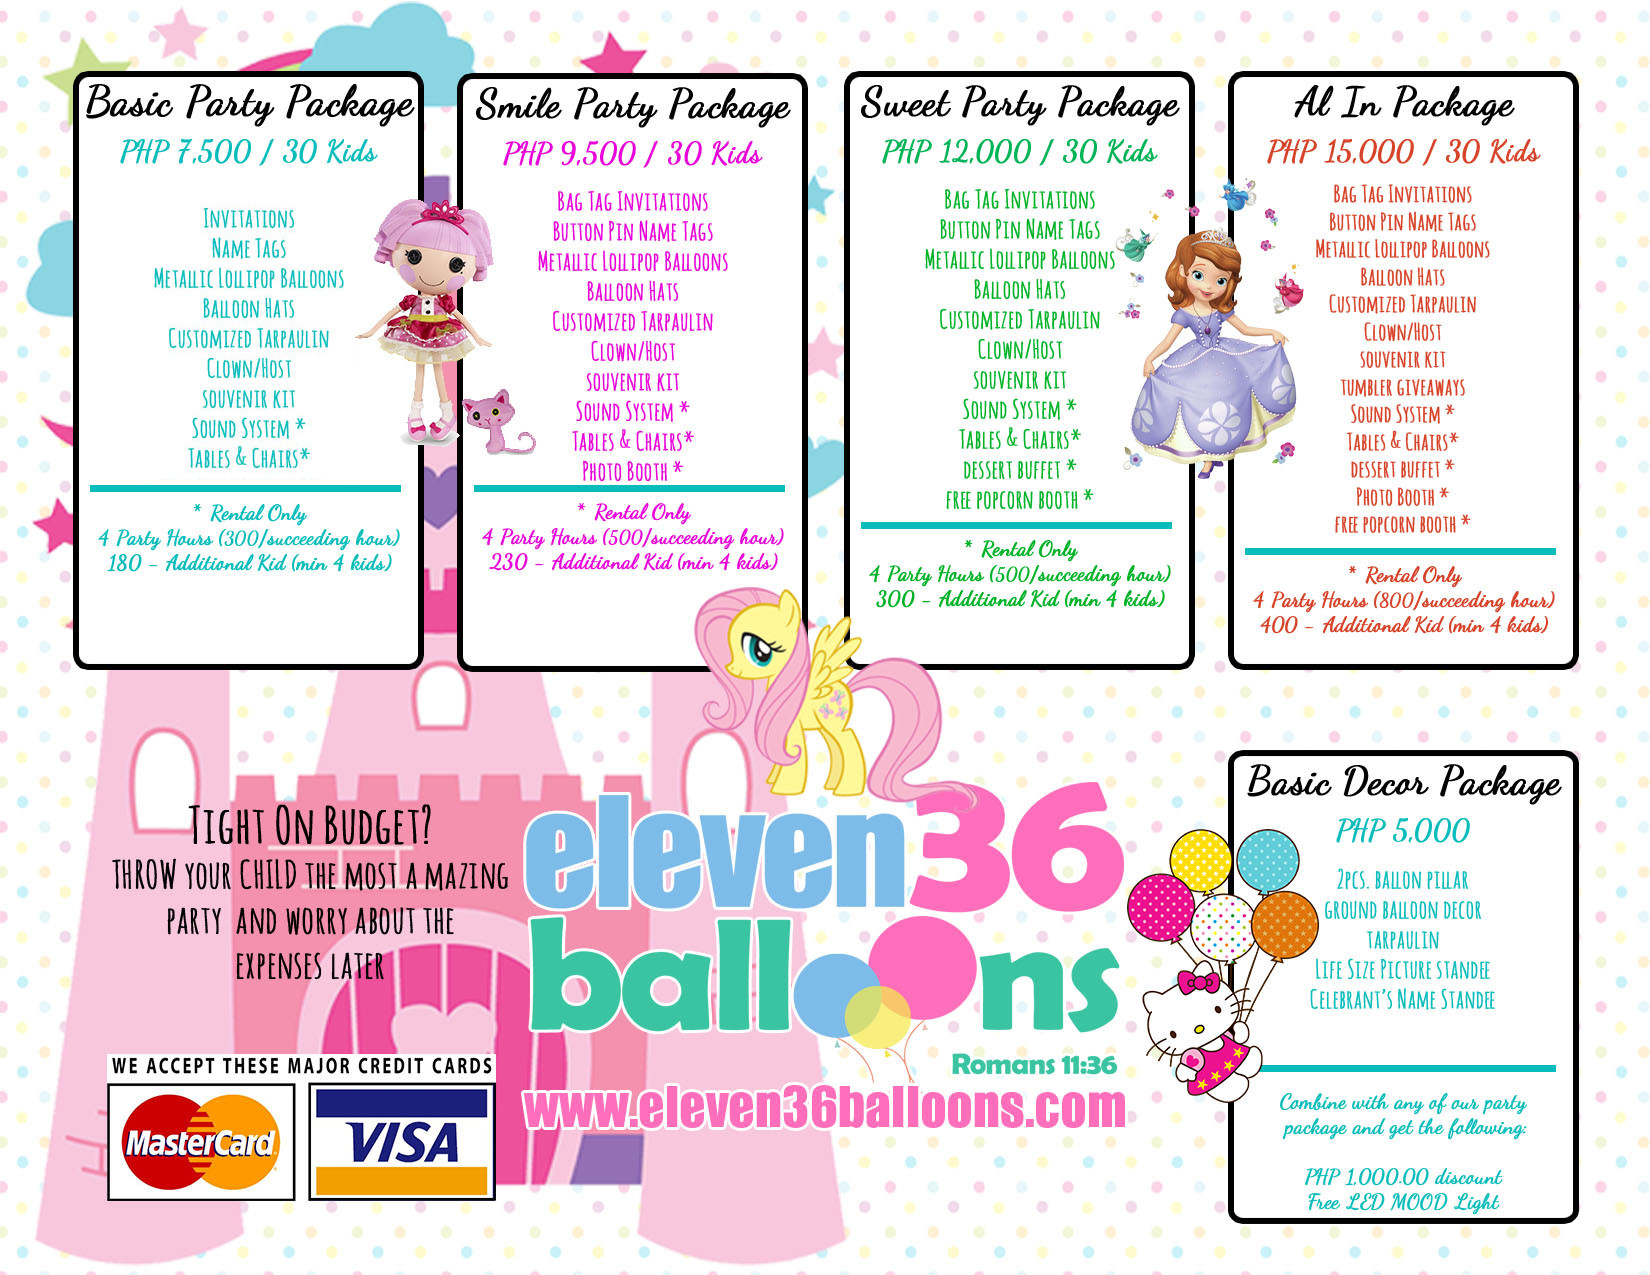 Birthday Party Packages
 For Hire Party Packages Eleven36 Party & Events